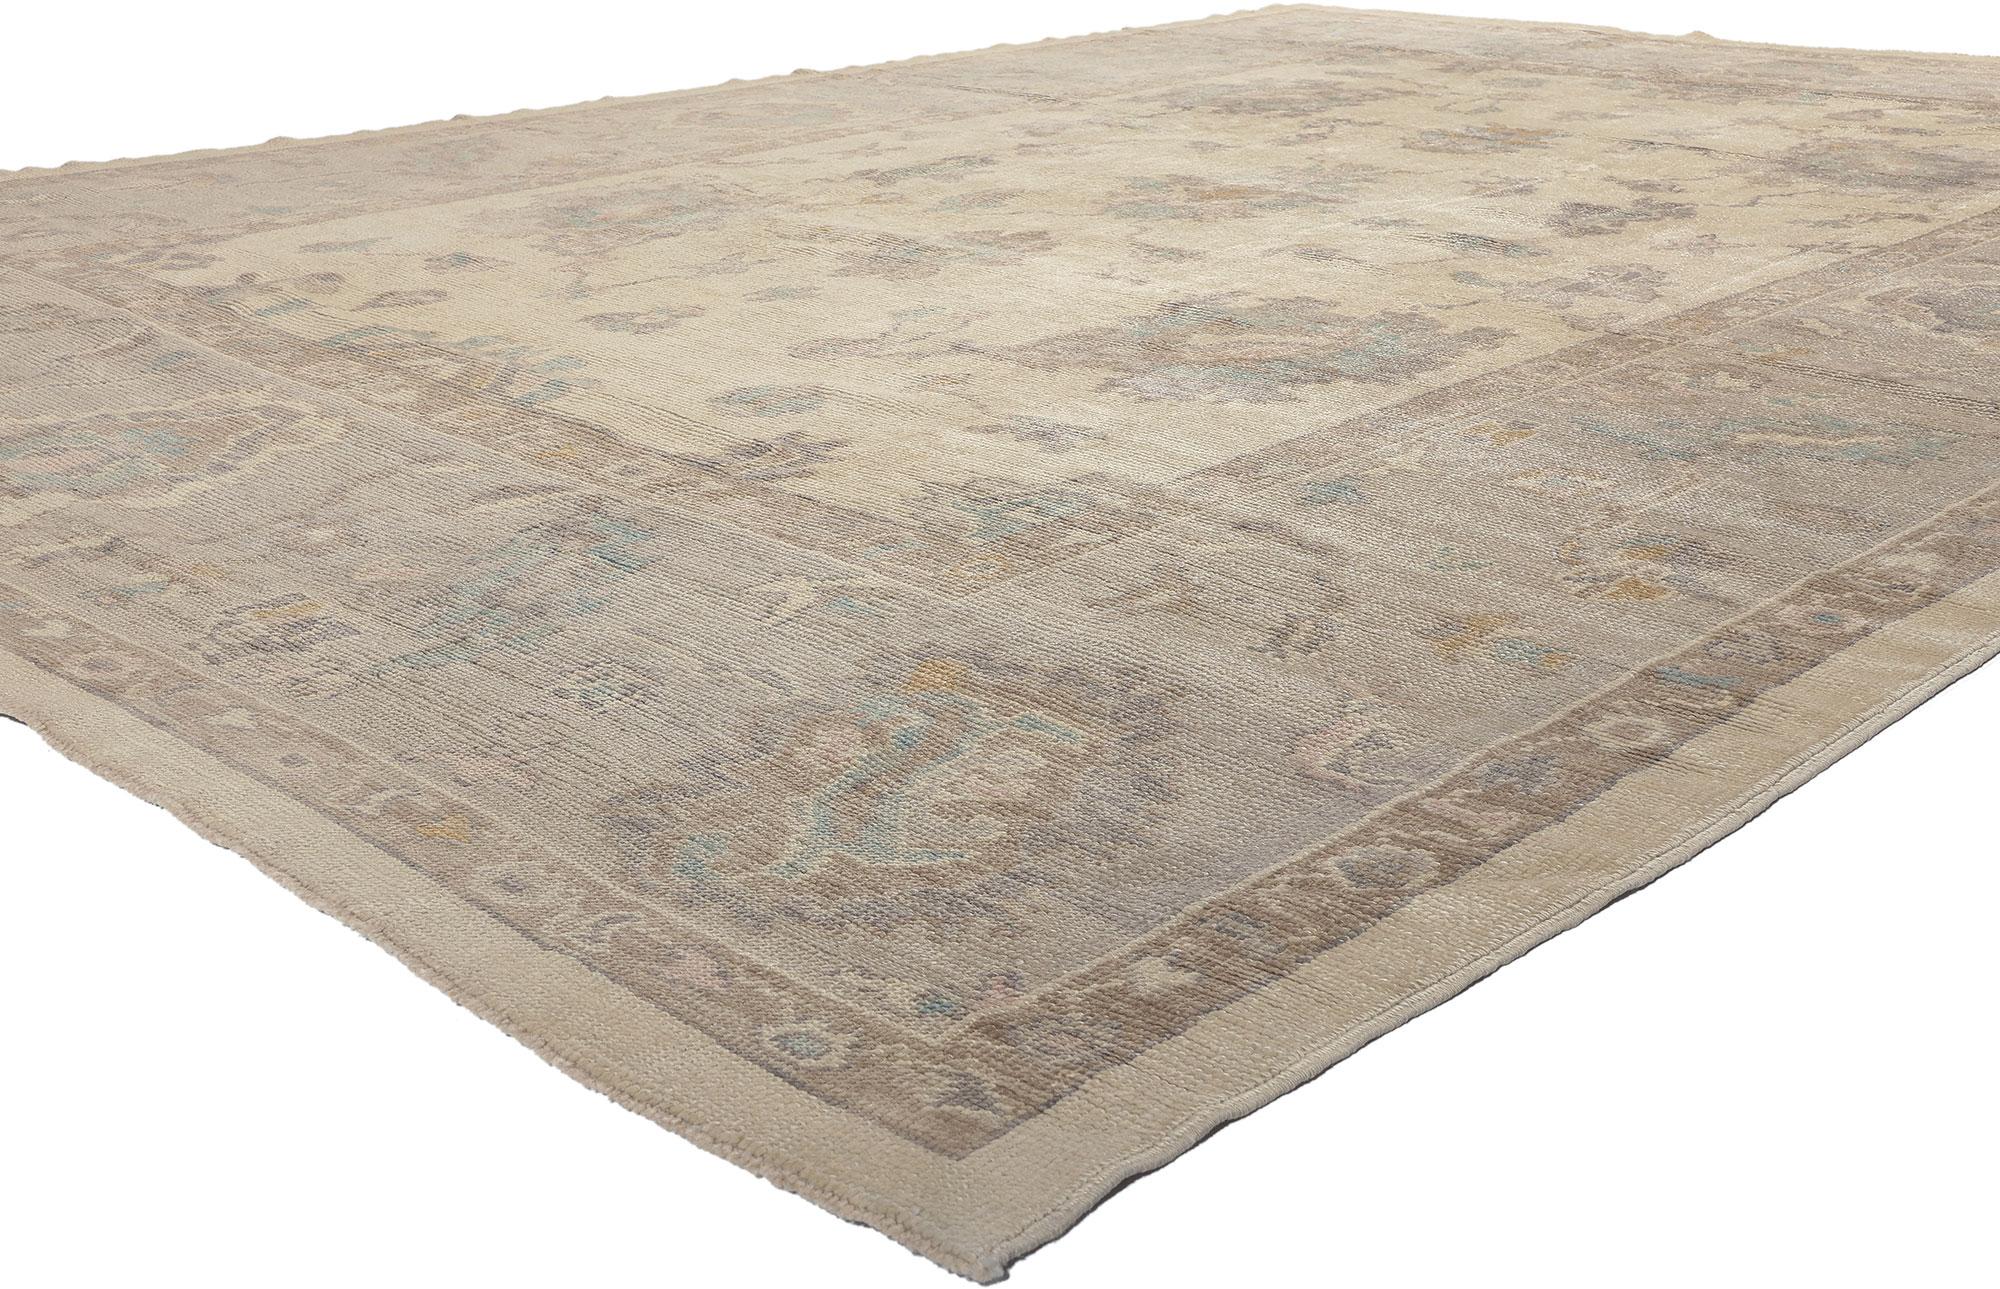 52380 Modern Pastel Oushak Turkish Rug, 09'06 x 12'11. Indulge in the simplicity of Shibui and elements of Biophilic Design in this hand-knotted wool modern Turkish Oushak rug. The subdued ornamentation and pastel earth-tone color palette woven into